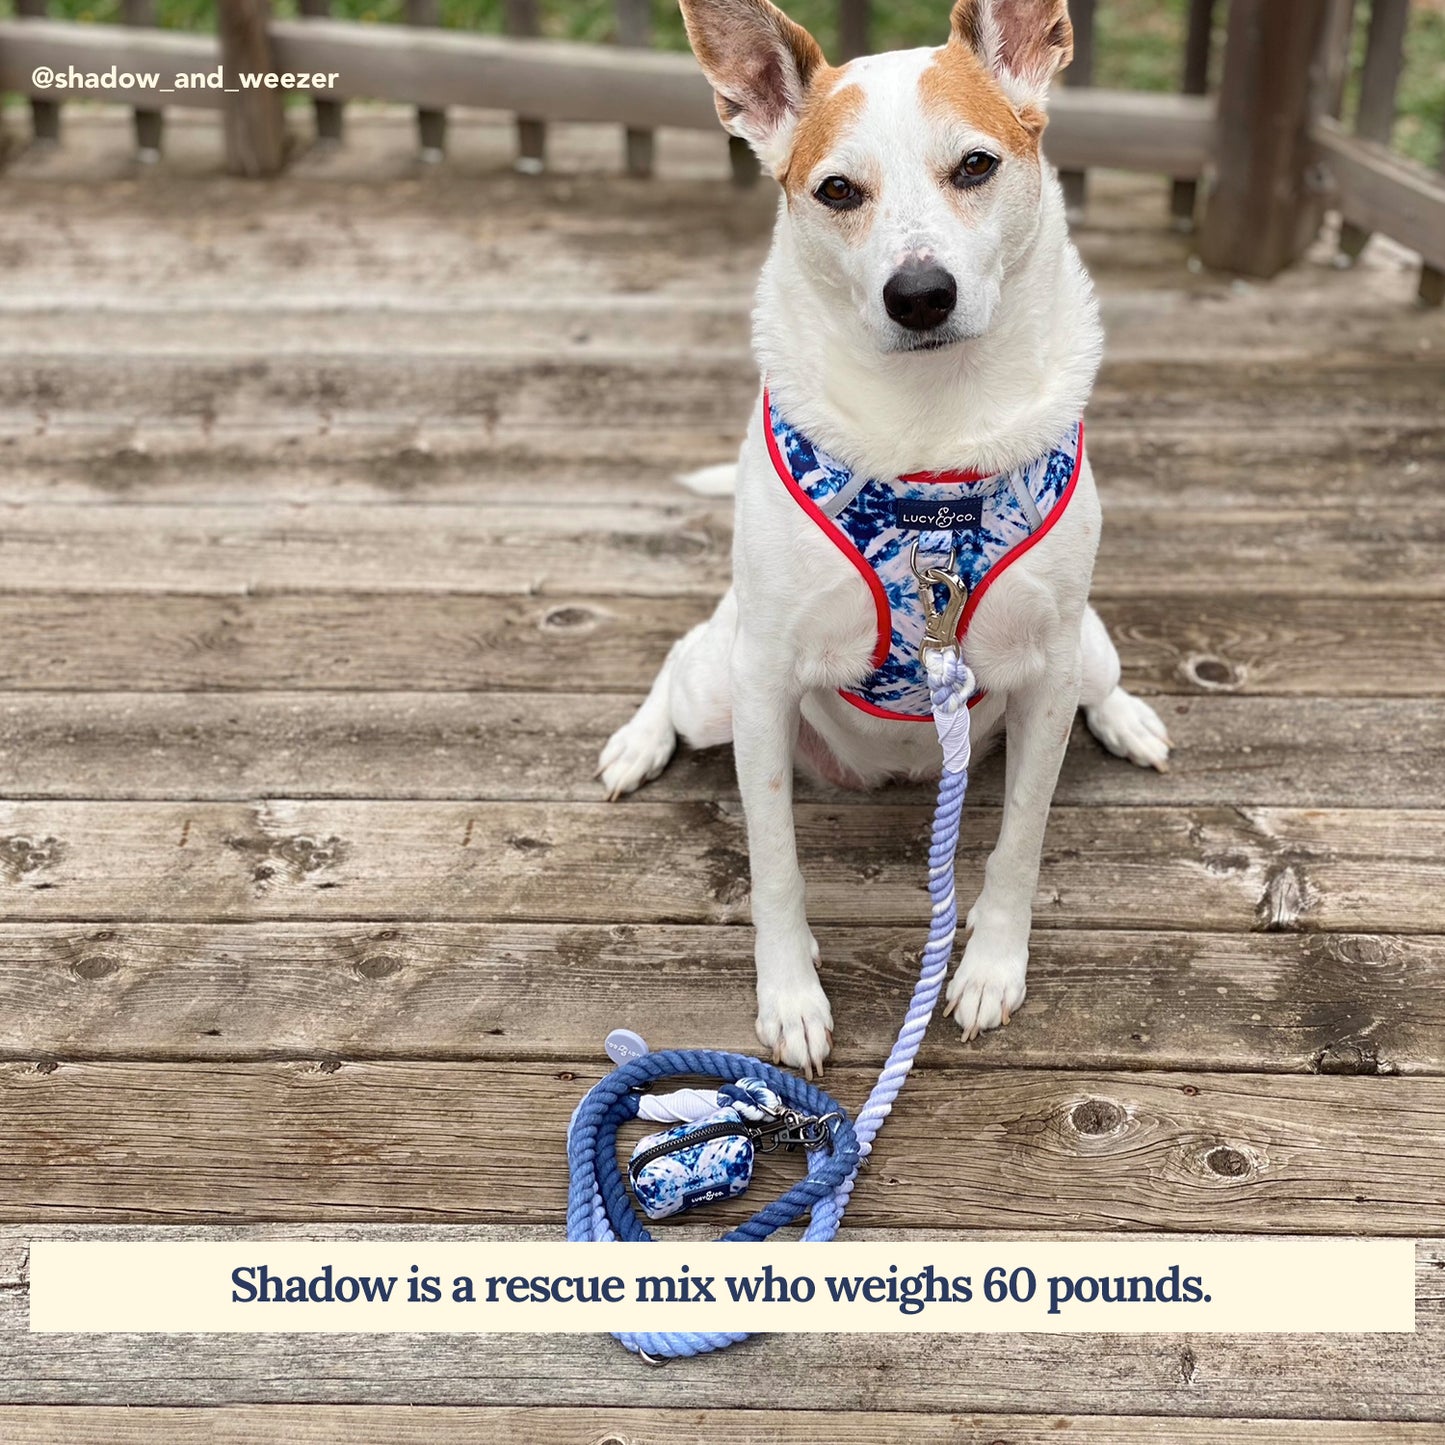 The Blueberry Twist Hands-Free Rope Leash